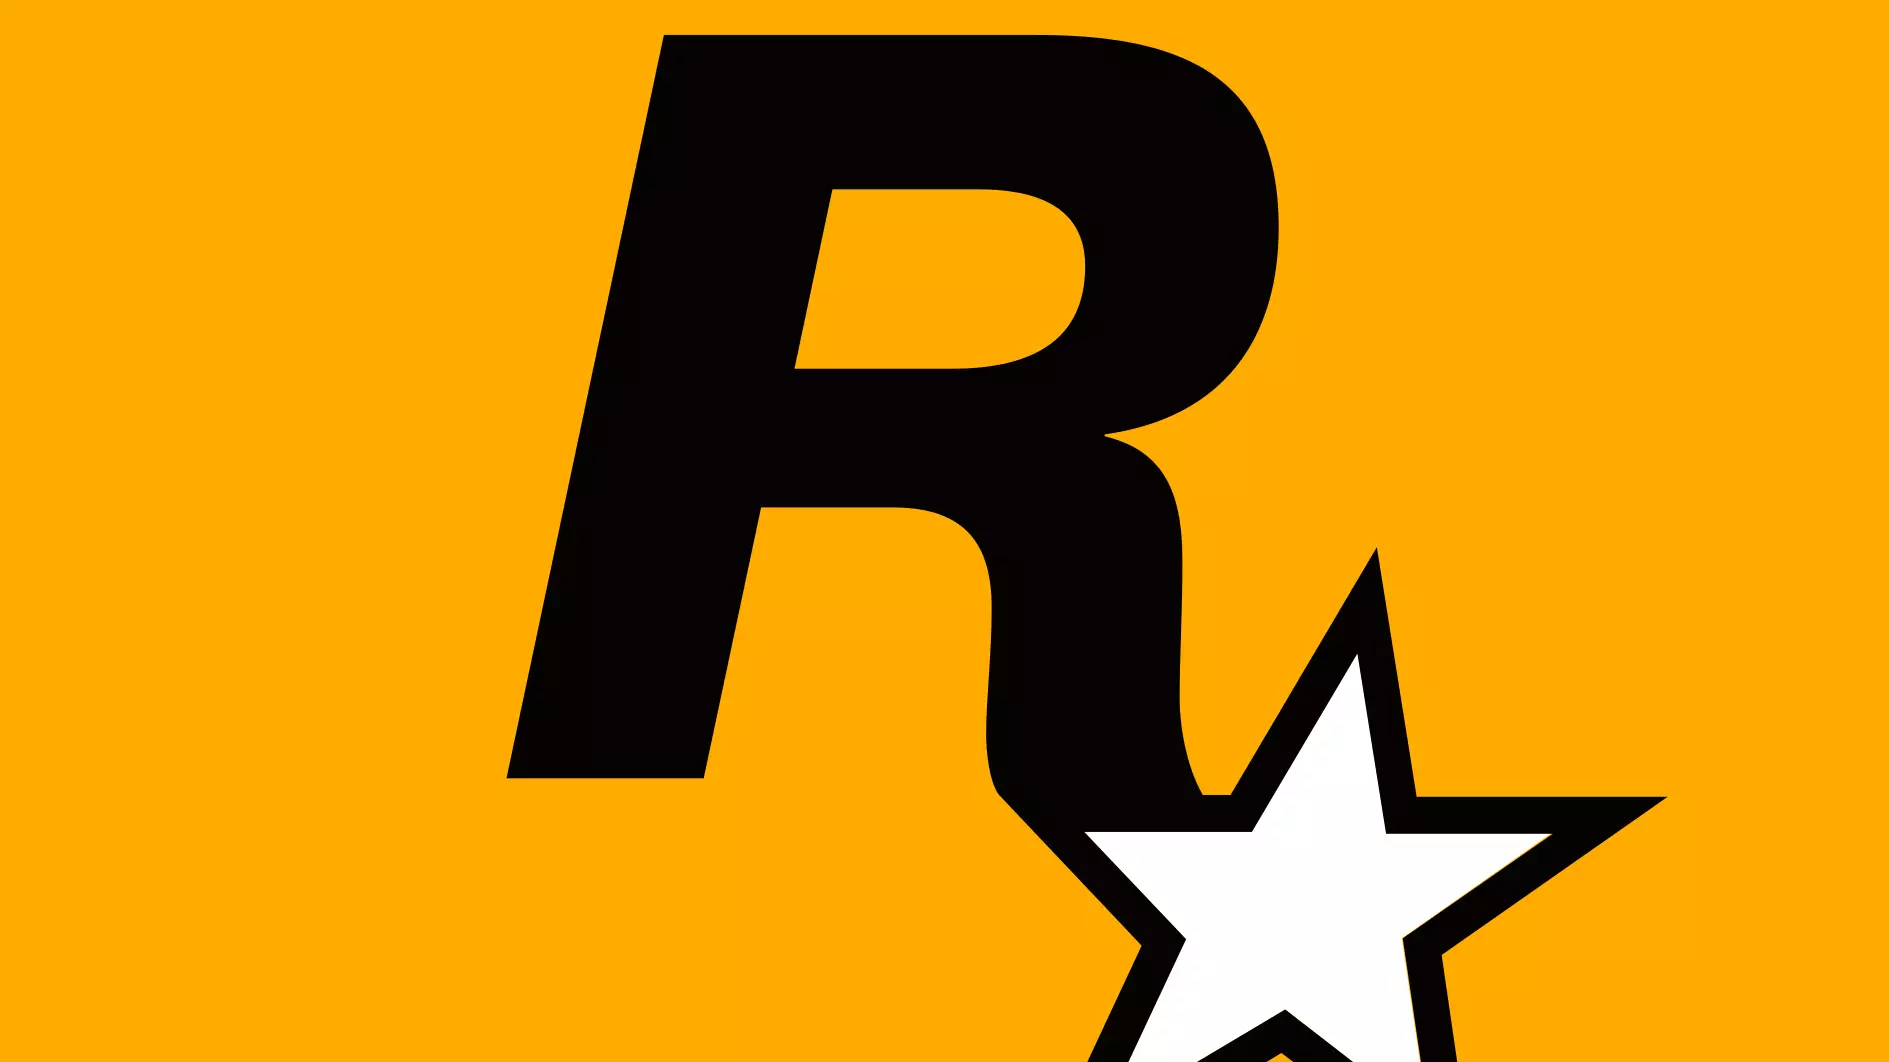 Rockstar Is Looking For Full-Time Game Testers In The UK